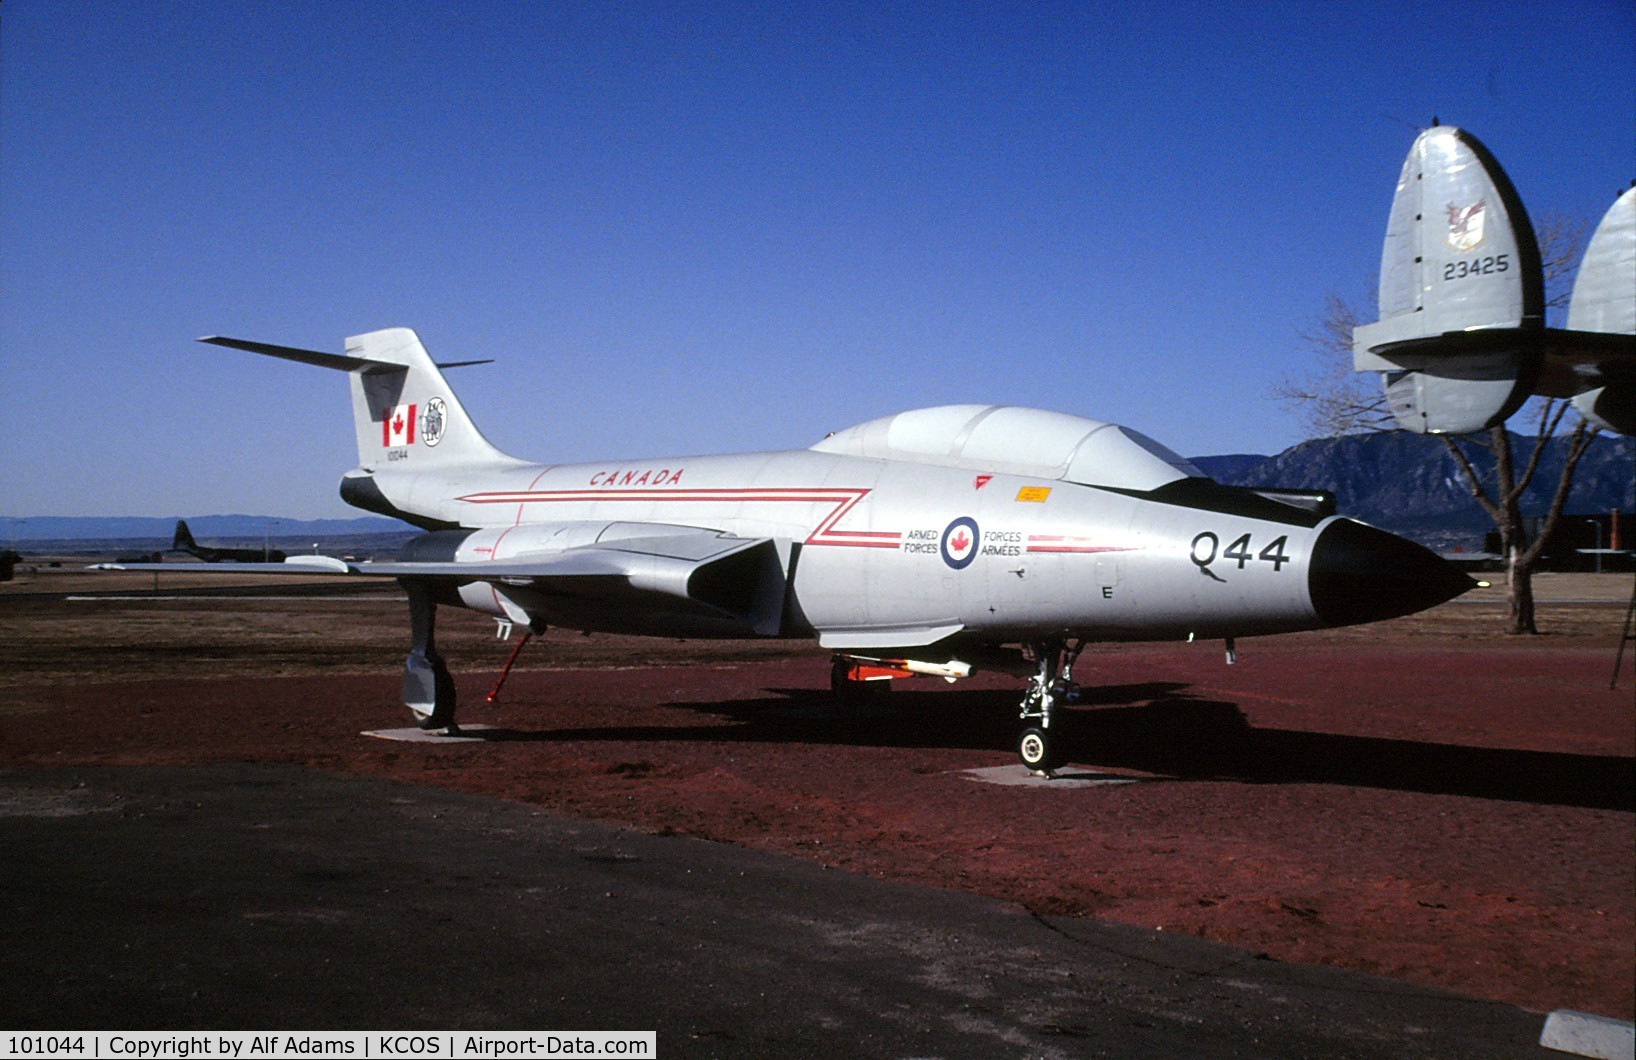 101044, 1957 McDonnell CF-101B Voodoo C/N 559, Shown at the NORAD Museum on Peterson Air Force Base, Colorado Springs, Colorado in 1992.